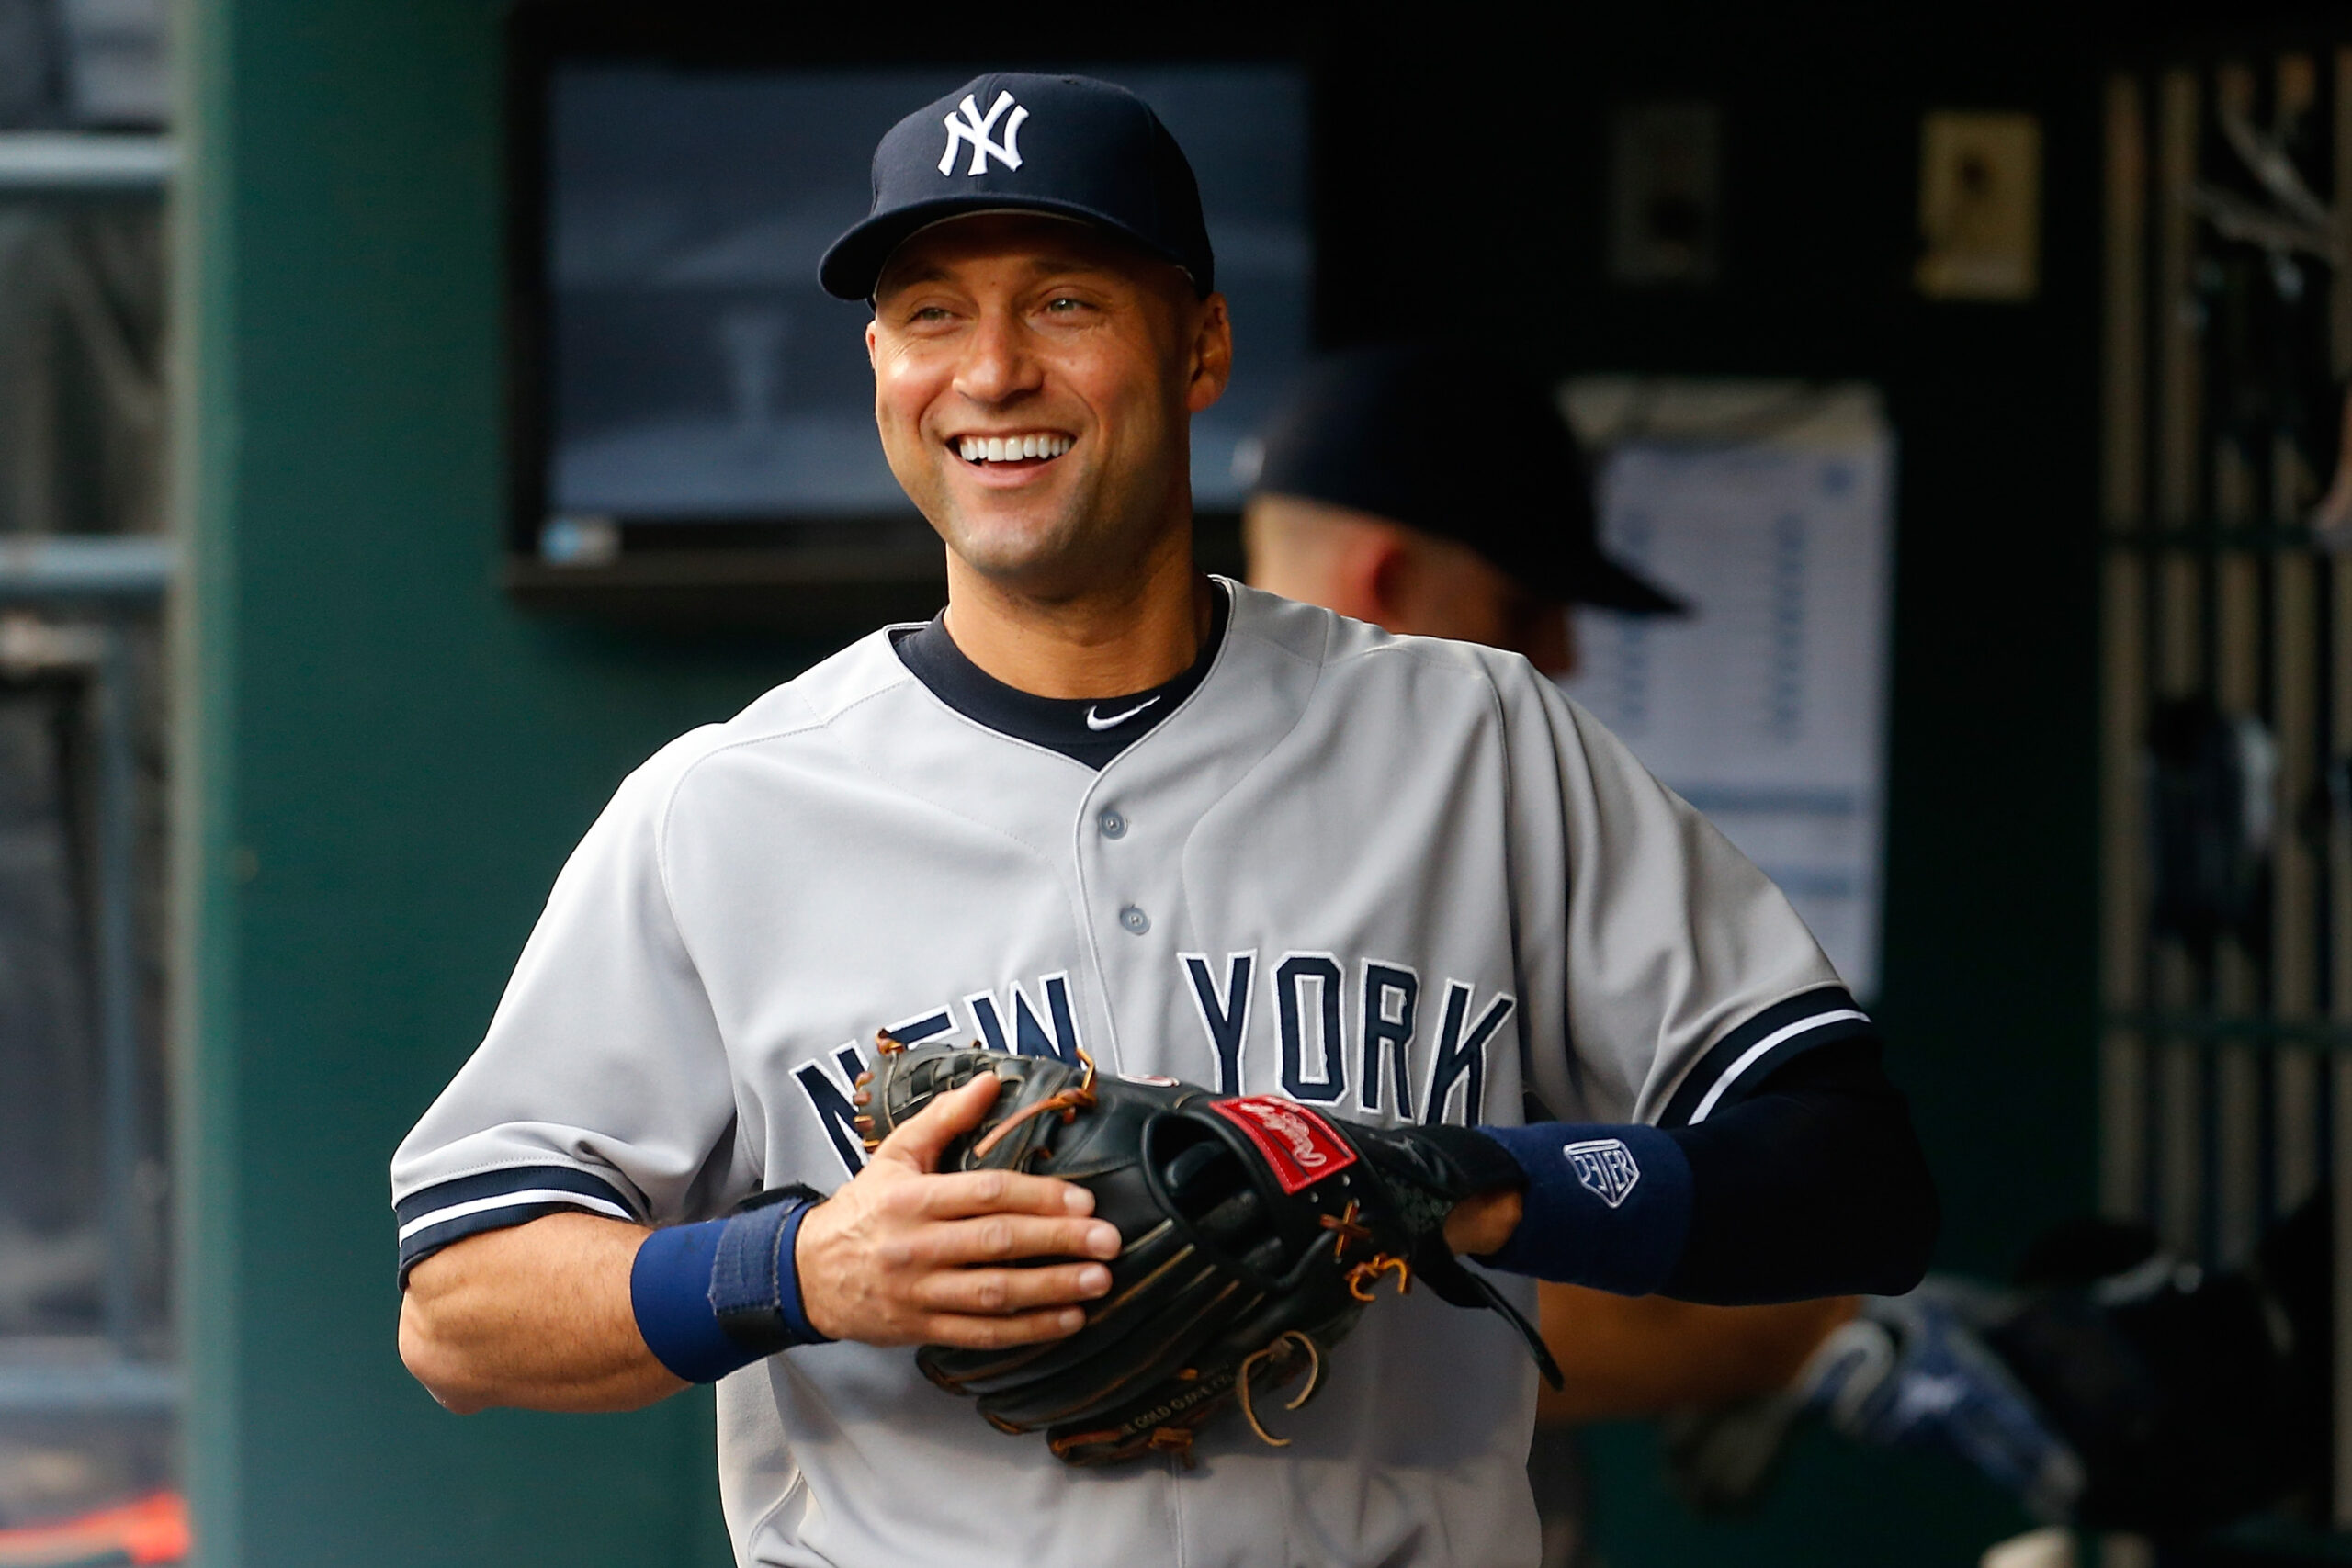 Derek Jeter - “It's so important to surround yourself with a strong  supporting cast who will guide you through obstacles and help you achieve  your greatest potential. My parents have always been